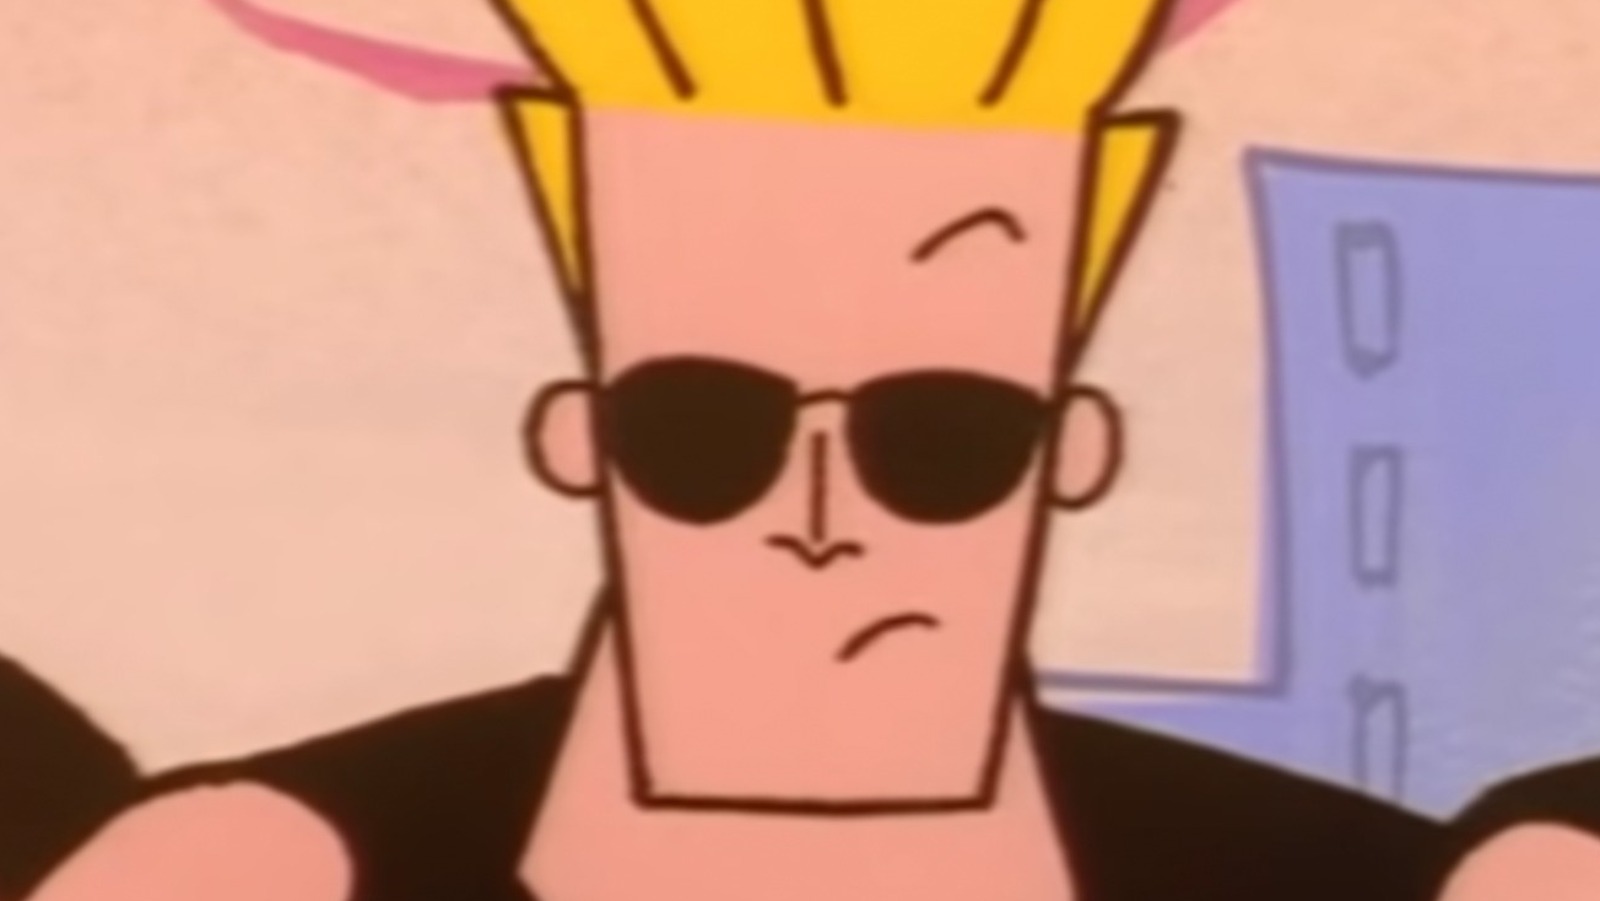 https://www.looper.com/img/gallery/the-worst-thing-johnny-bravo-ever-did/l-intro-1651932511.jpg